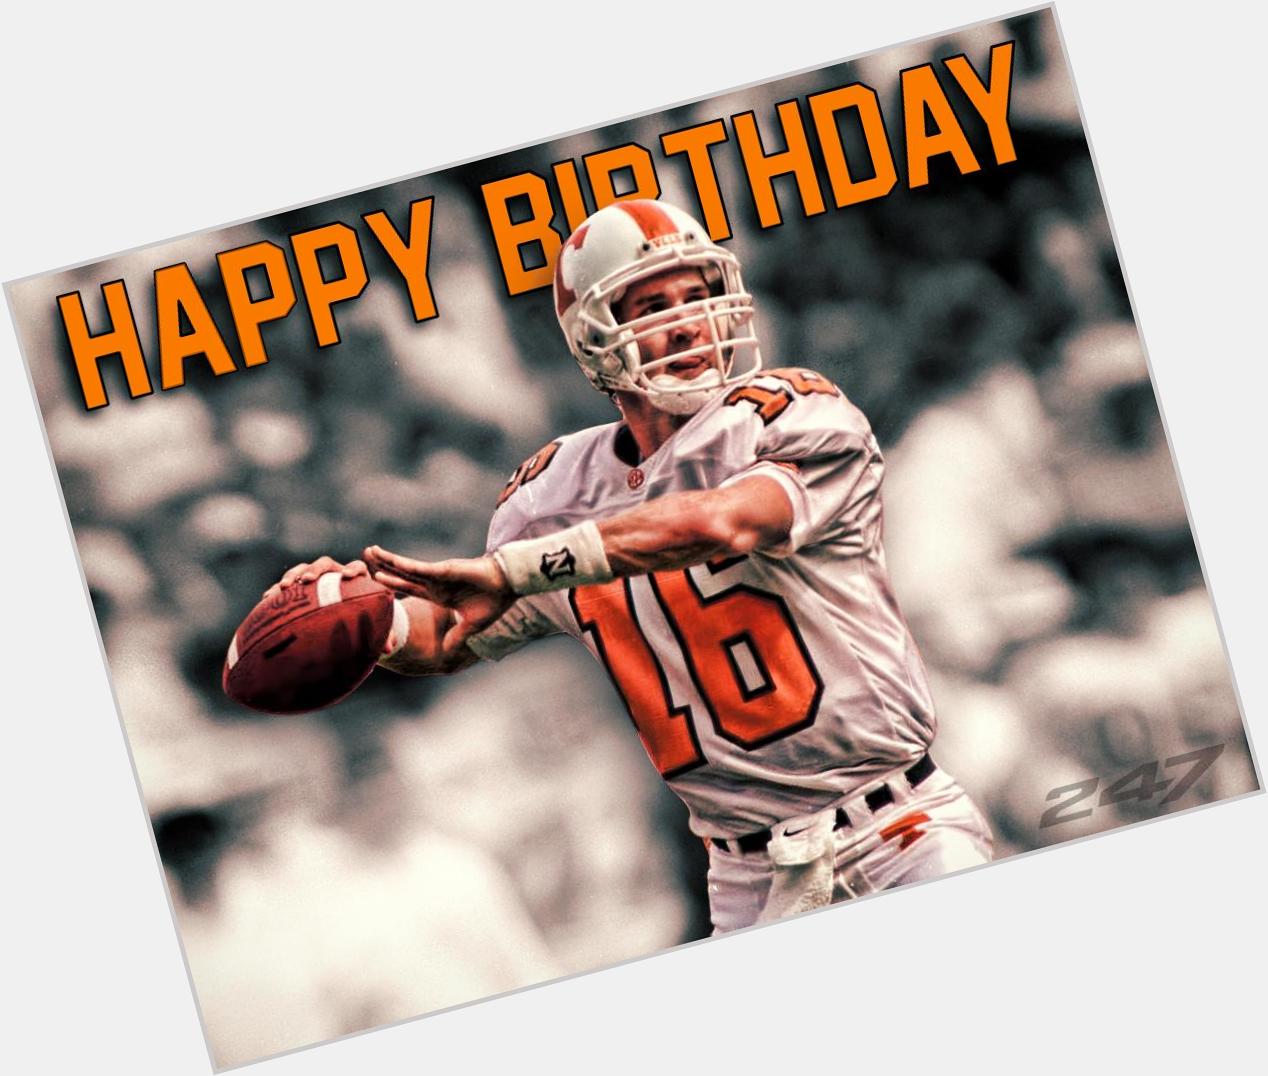 Happy Birthday to the one, the only, and the greatest of all time,  Peyton Manning! 